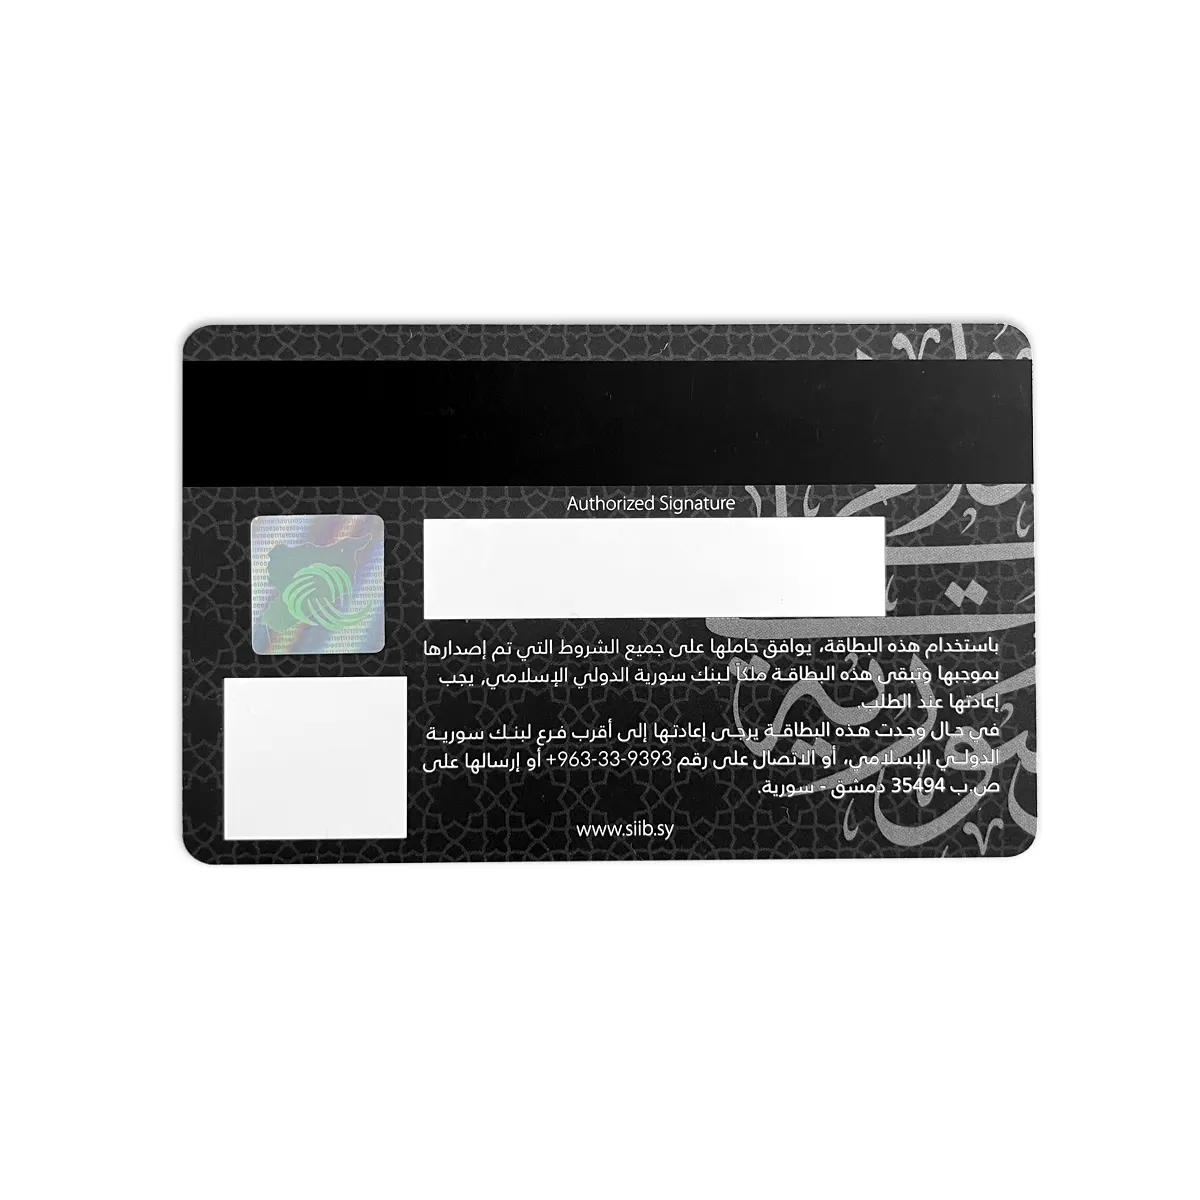 Custom visa gift card pvc inkjet card double side printing Apply to lamination machine to print business card